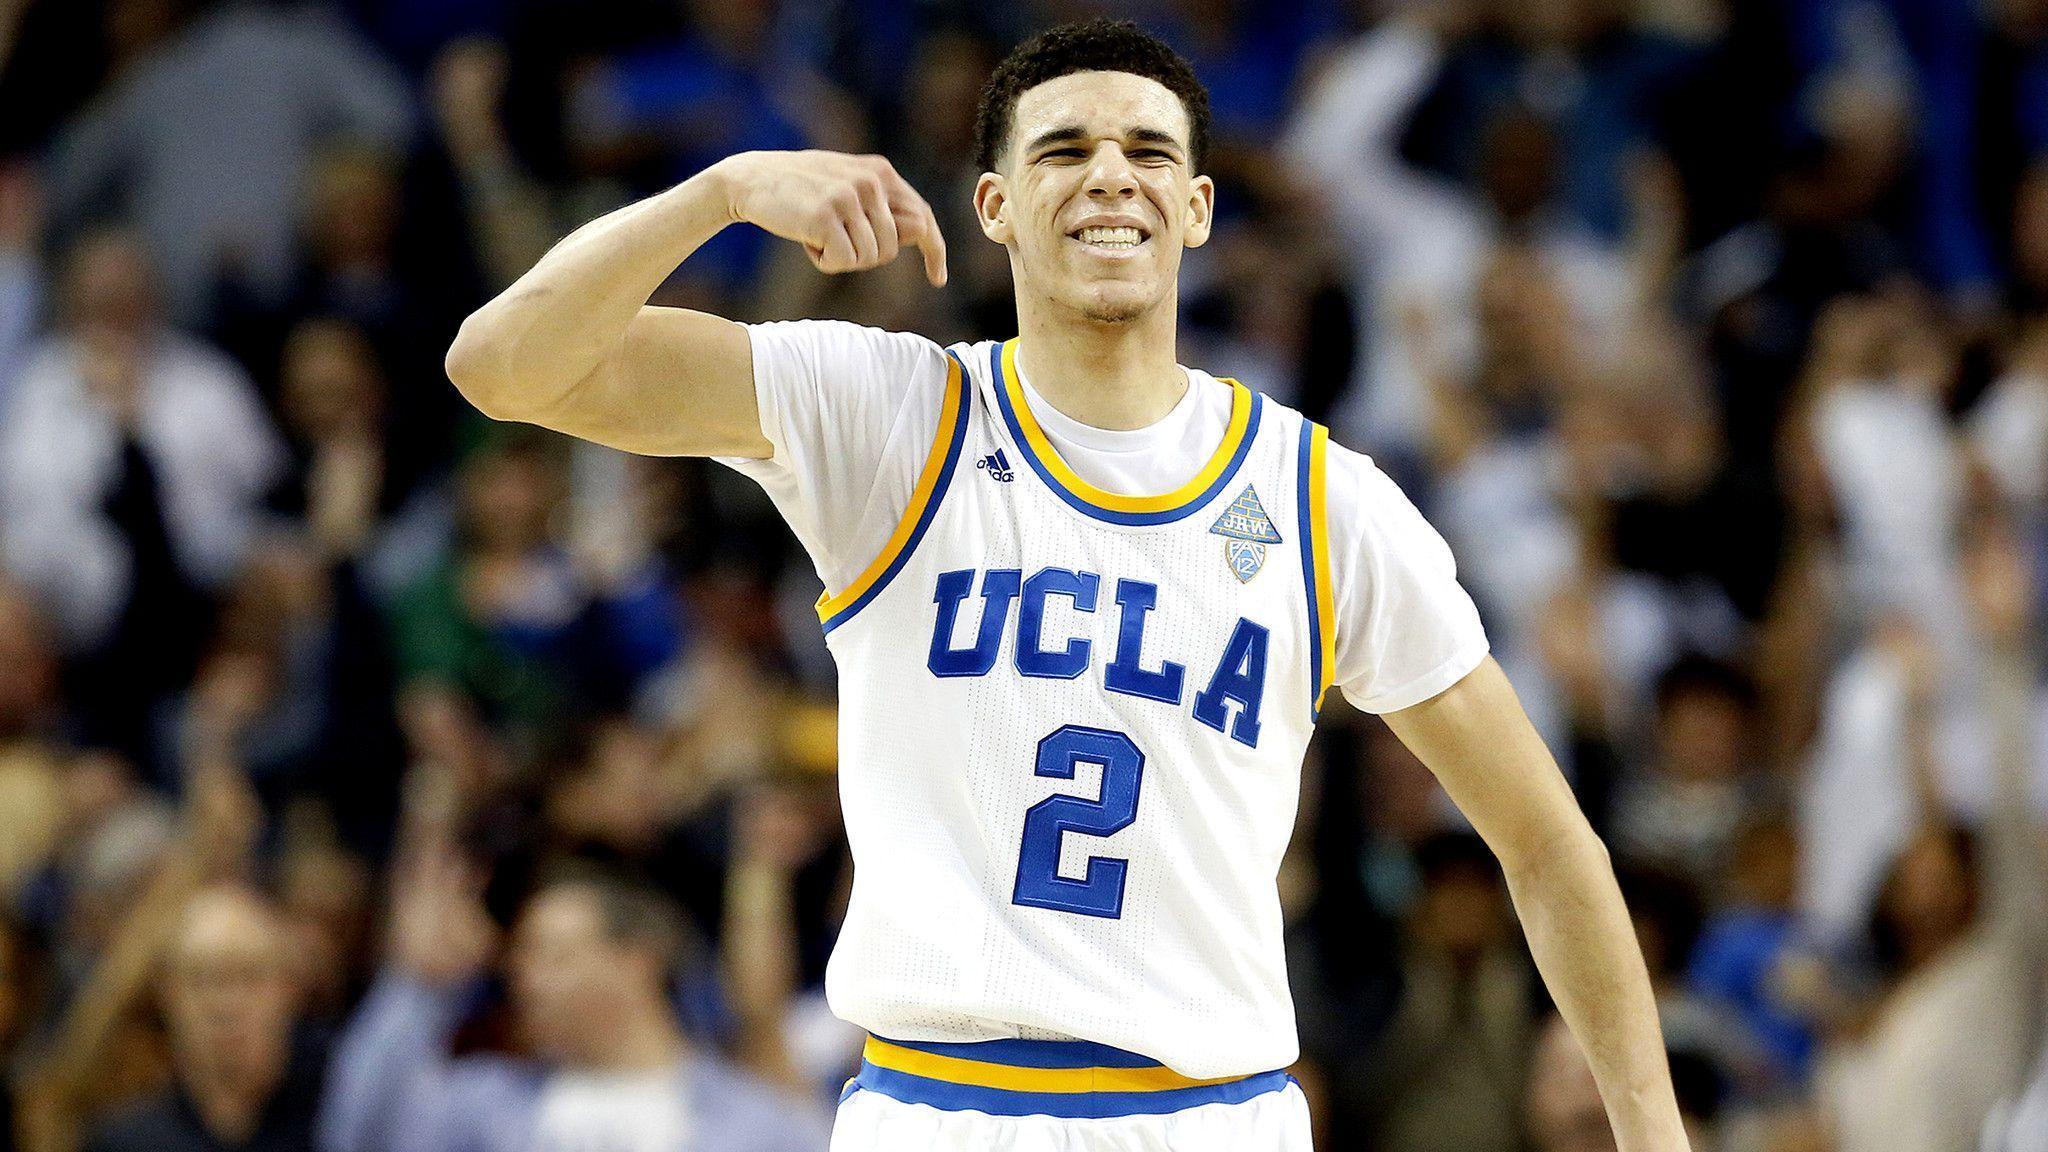 Father of UCLA star Lonzo Ball: ‘He’s going to be better than